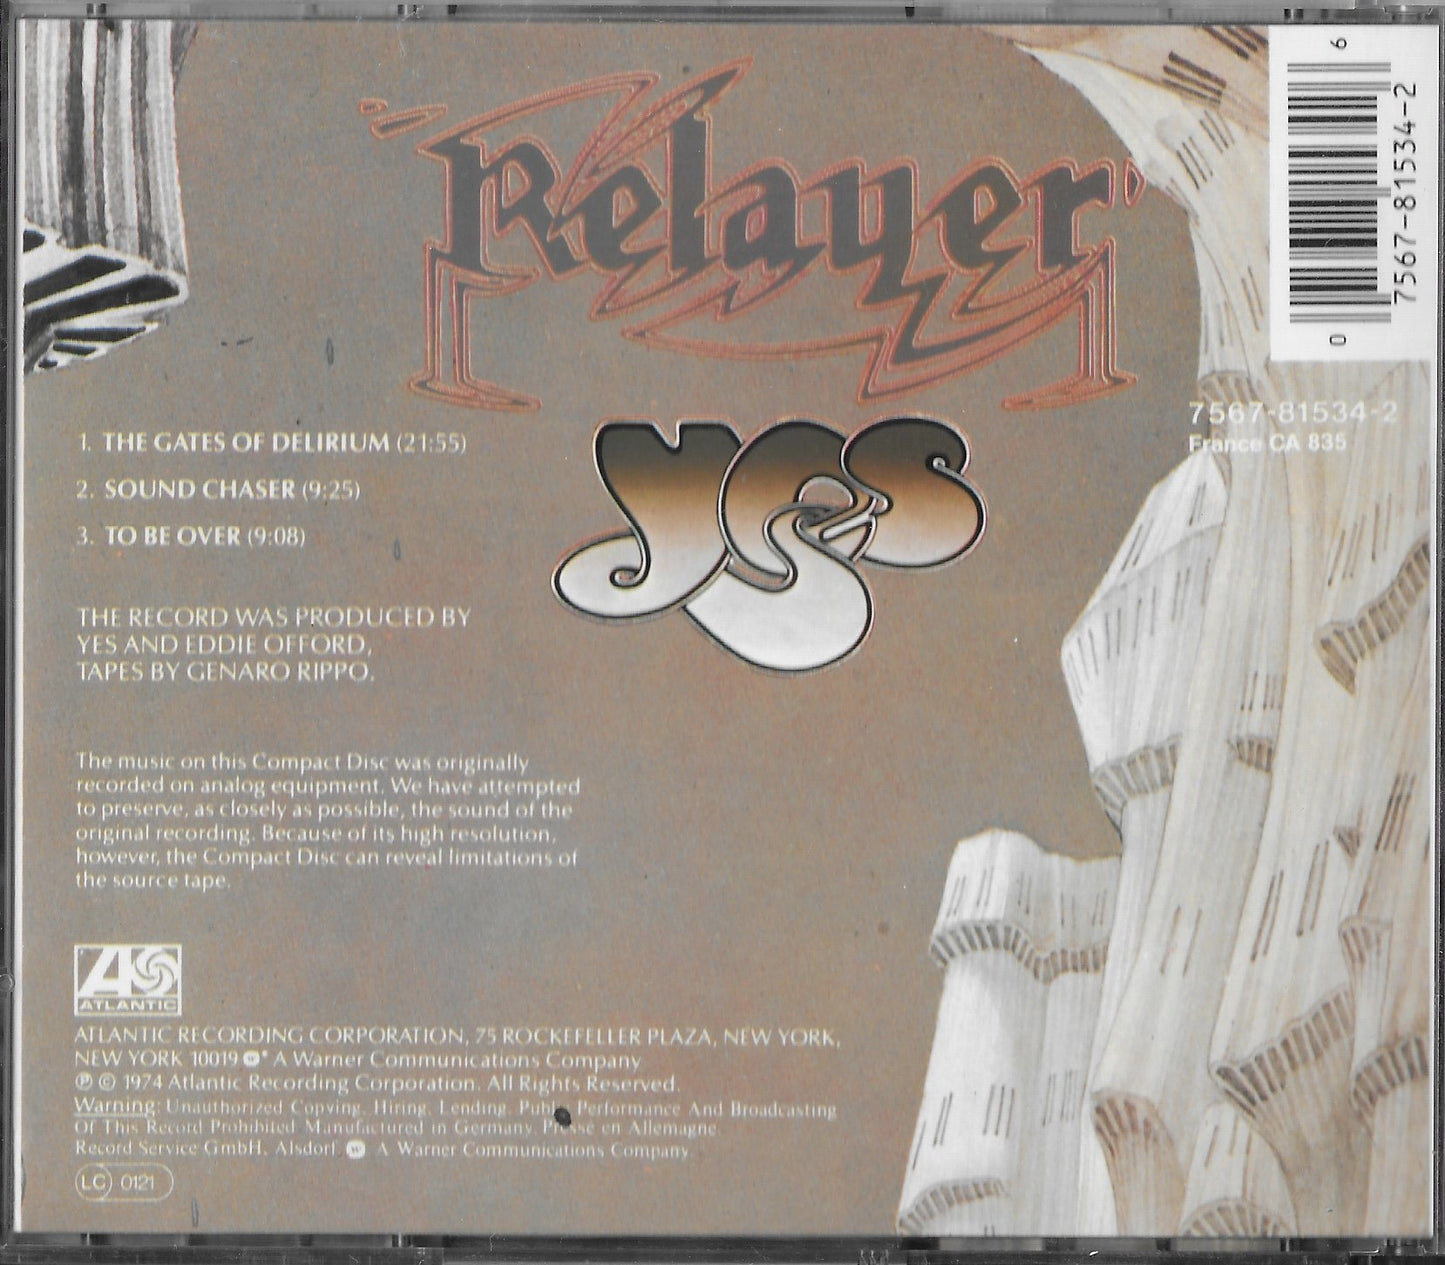 YES - Relayer